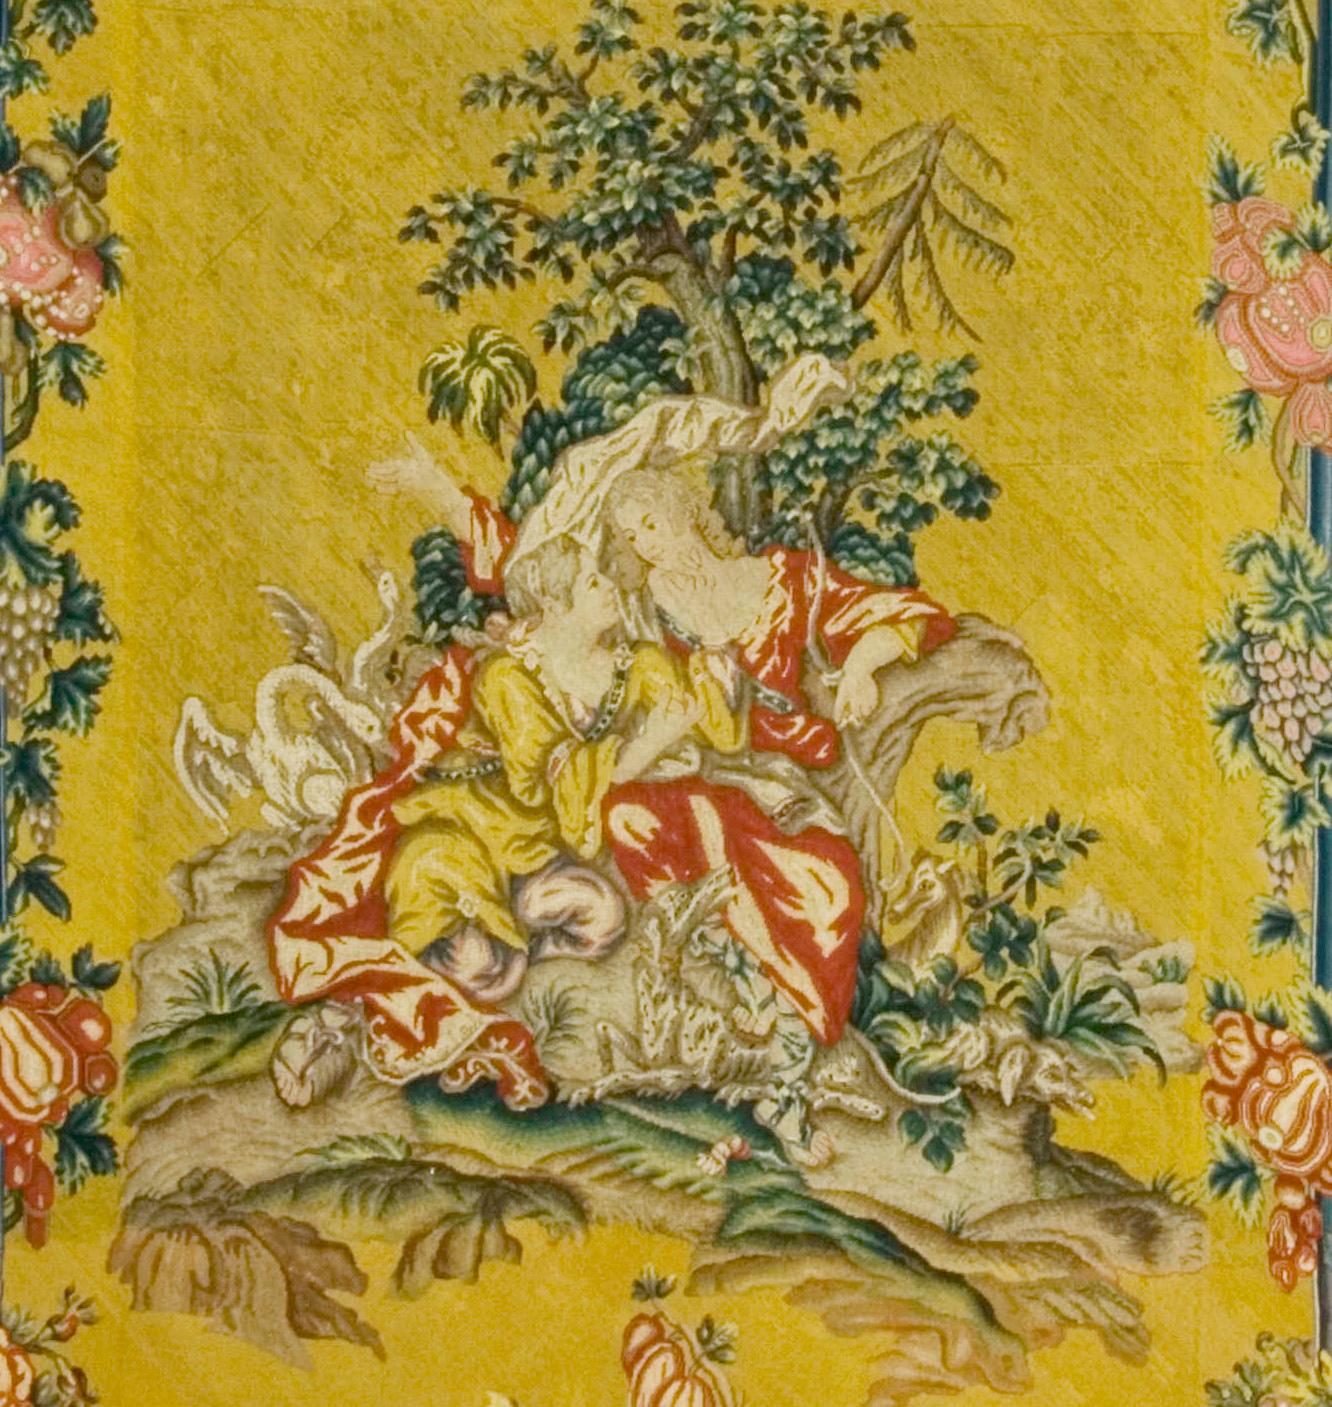 Needlepoint panel of a mythological scene in the manner of Boucher. One of a pair of arched panels possible Entre Fenetres, the orange yellow grounds display each an arch of fruits and flowers and a swag of similar character. There is a suspended